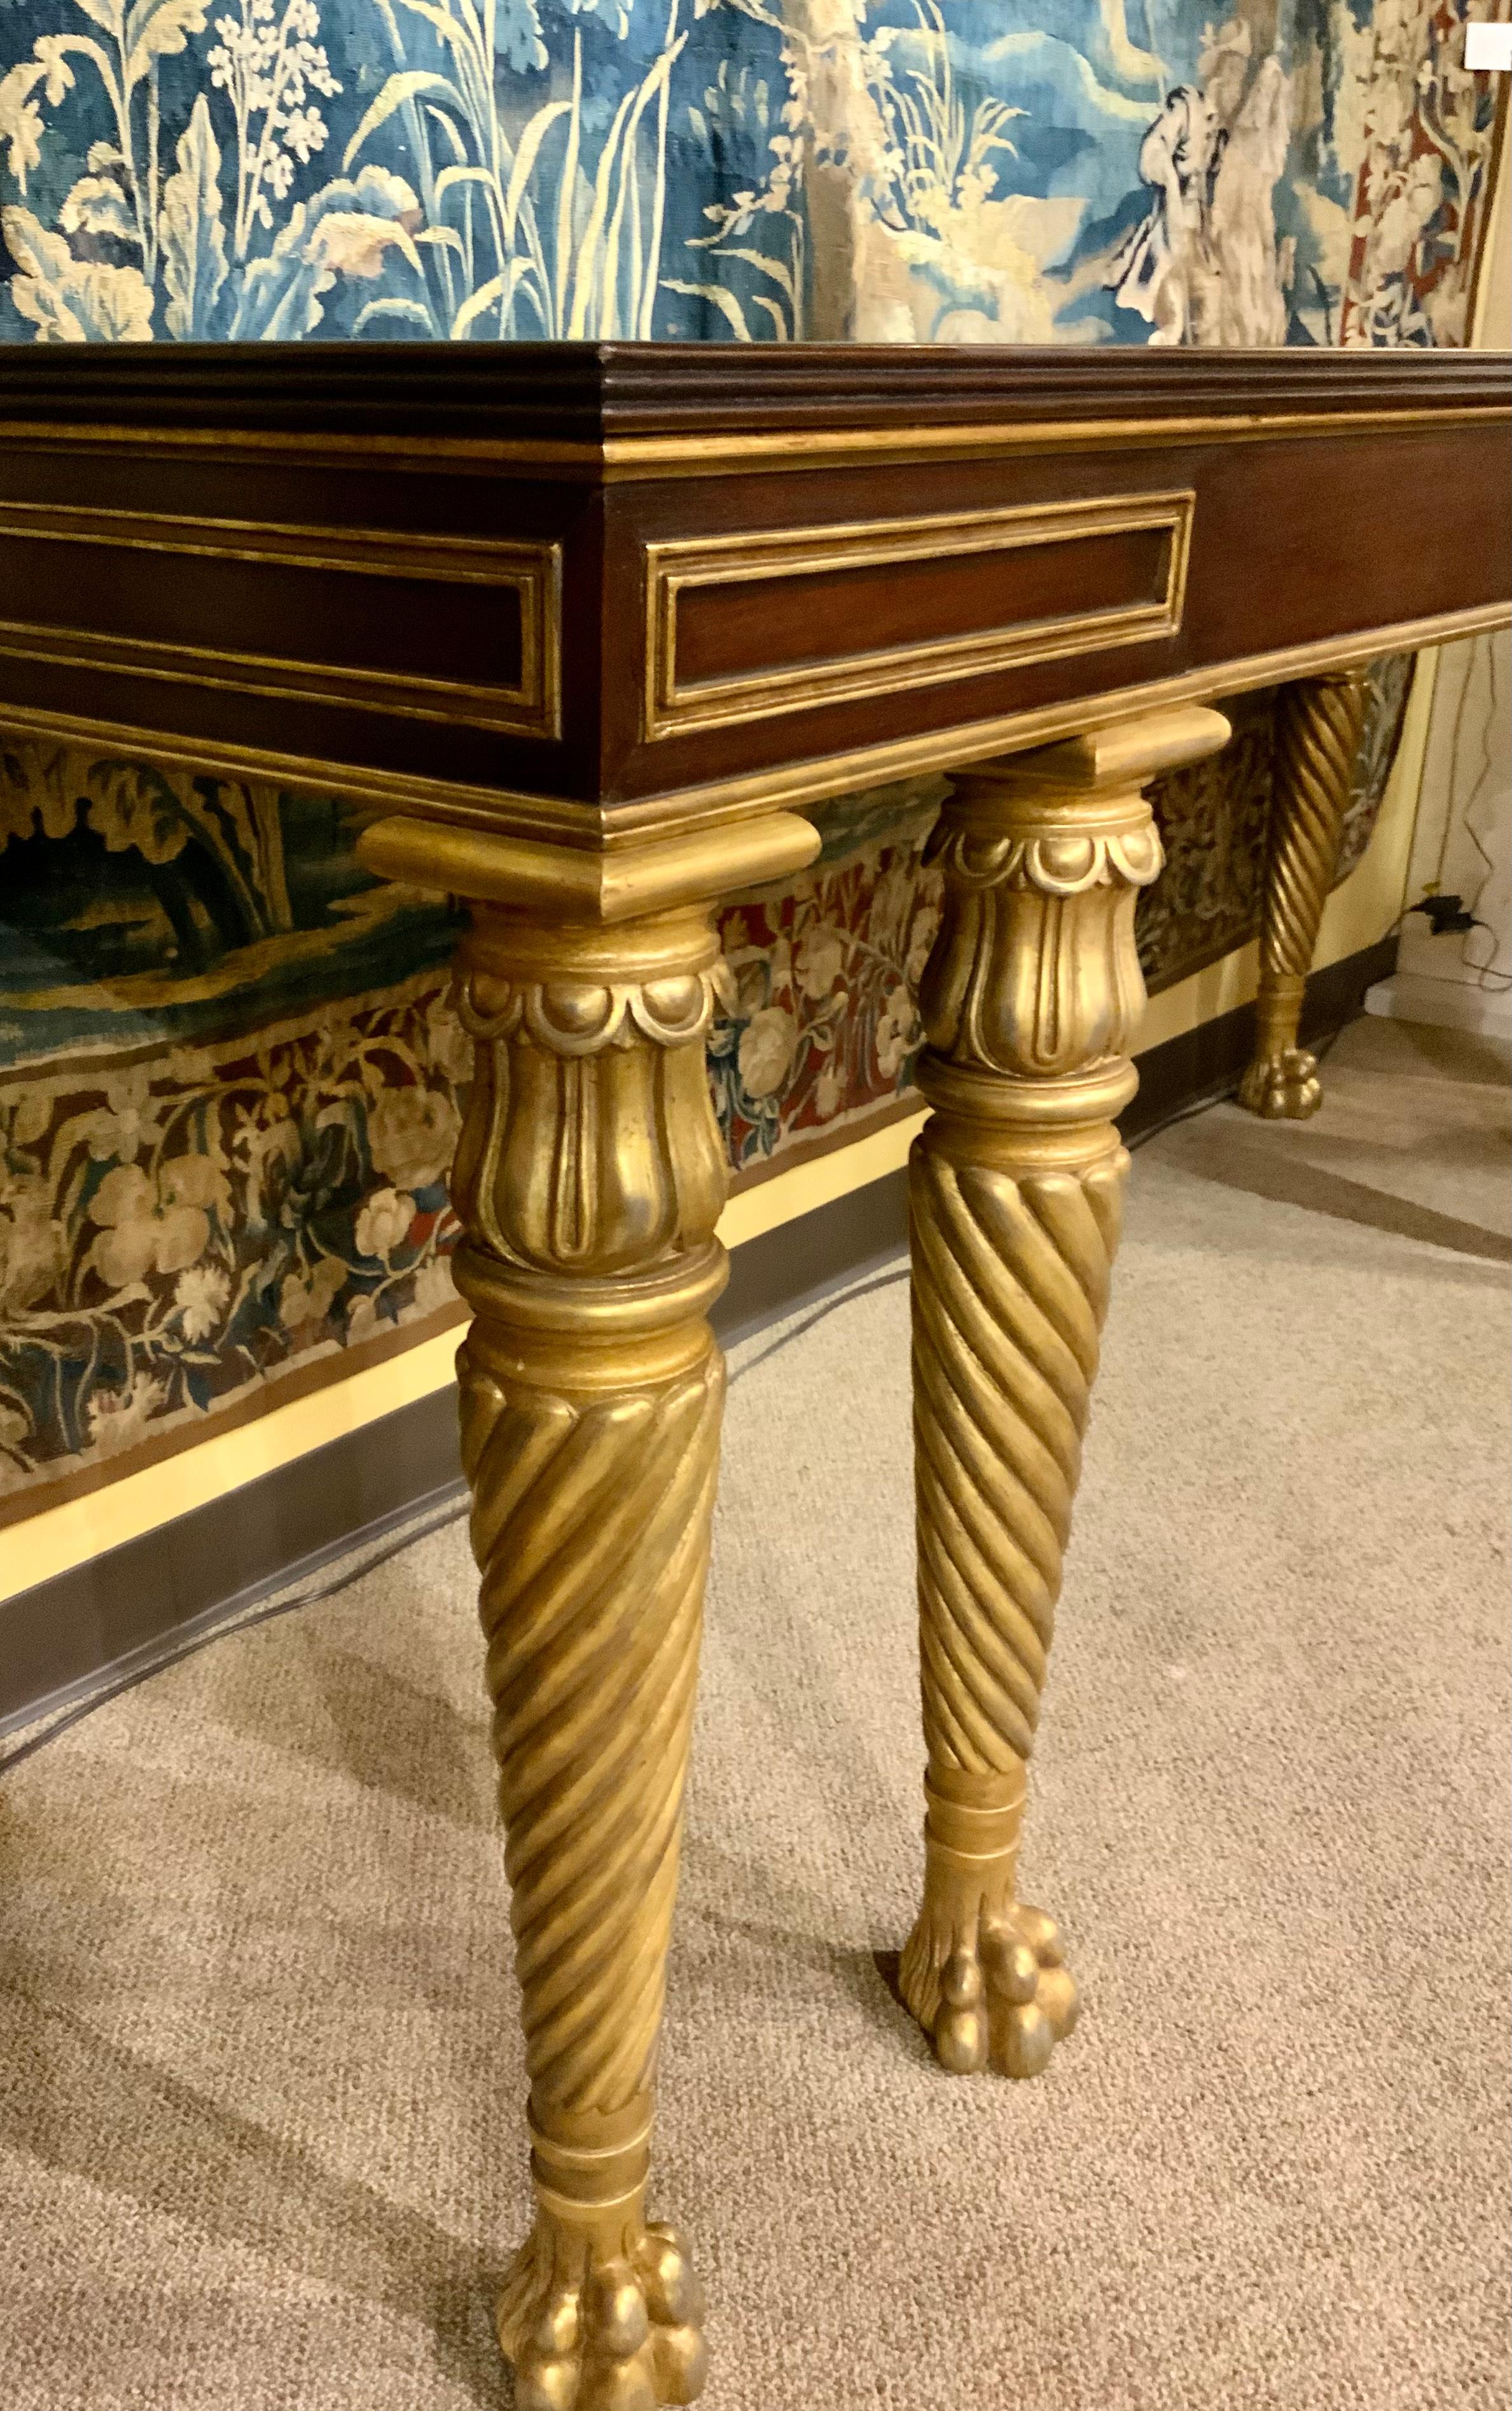 Mahogany wood in impeccable condition make this piece desirable.
It is in the Baltic neoclassical-style with parcel gilt wood. It is mid-century
With a rectangular top above a frame accented with various gilt 
Geometric moldings, raised on gilt